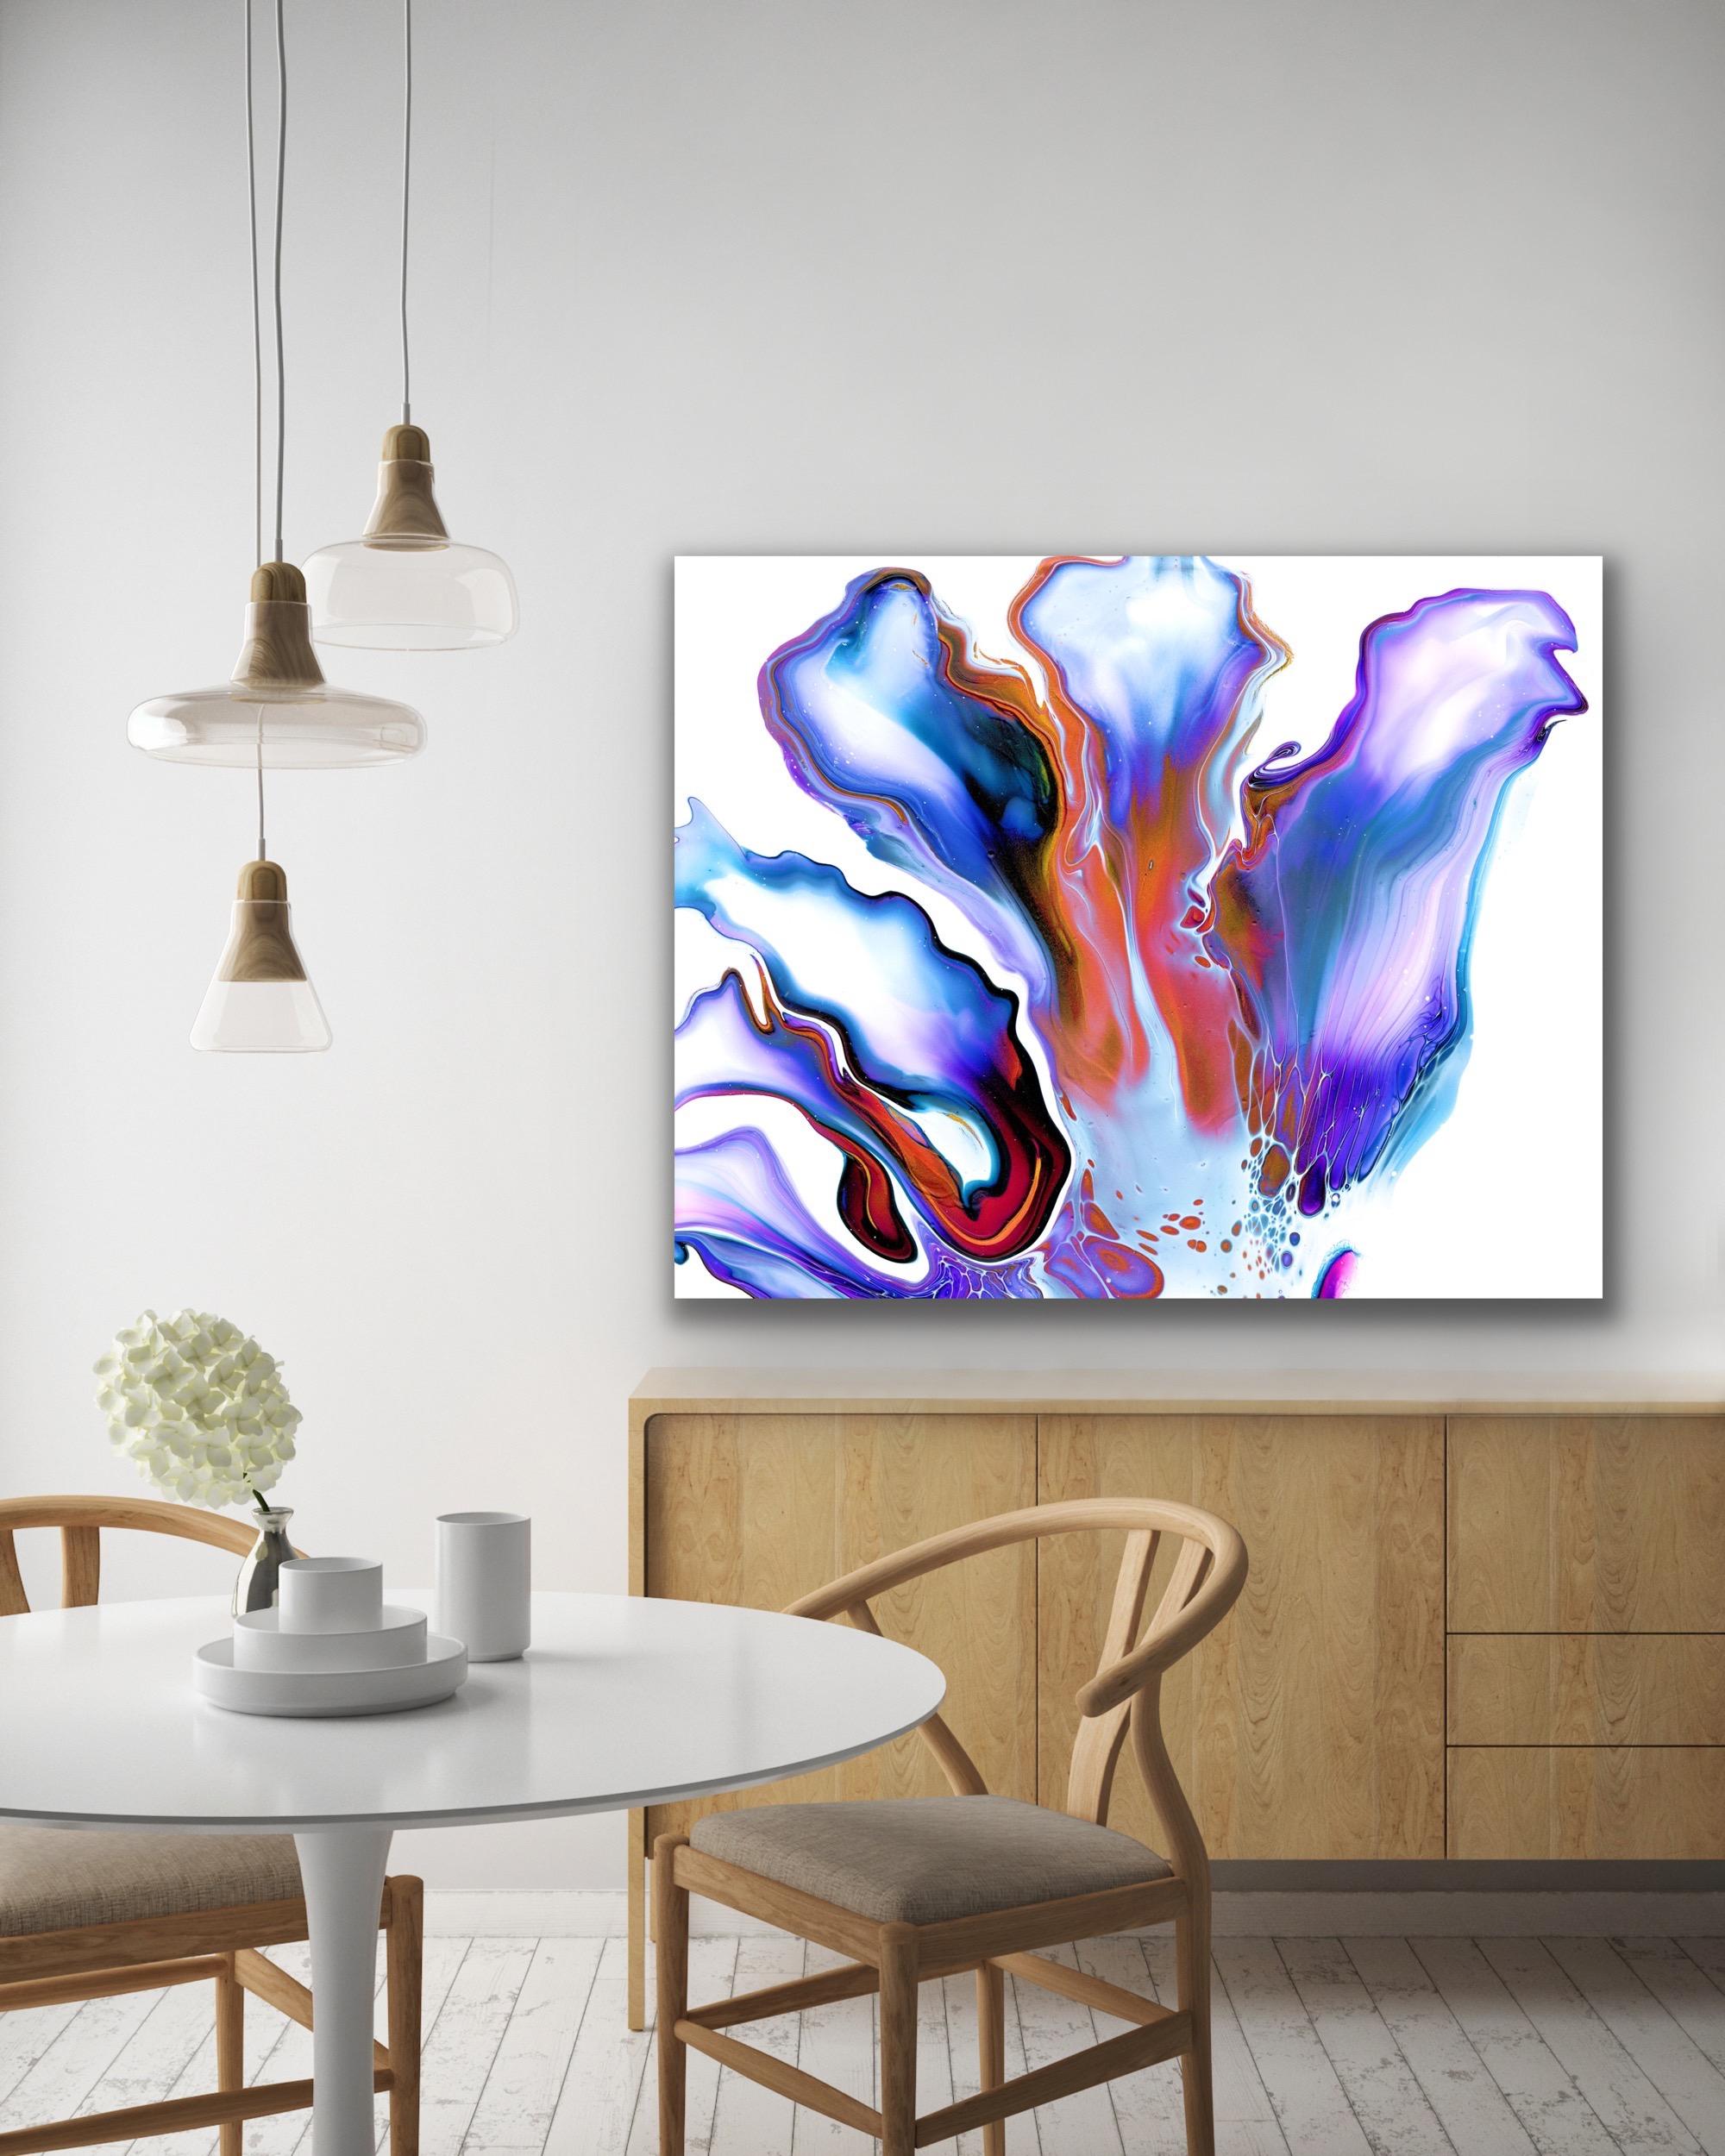 Abstract Contemporary Fluid Art, Celeste Reiter, Signed Limited Edition Giclee’ For Sale 1